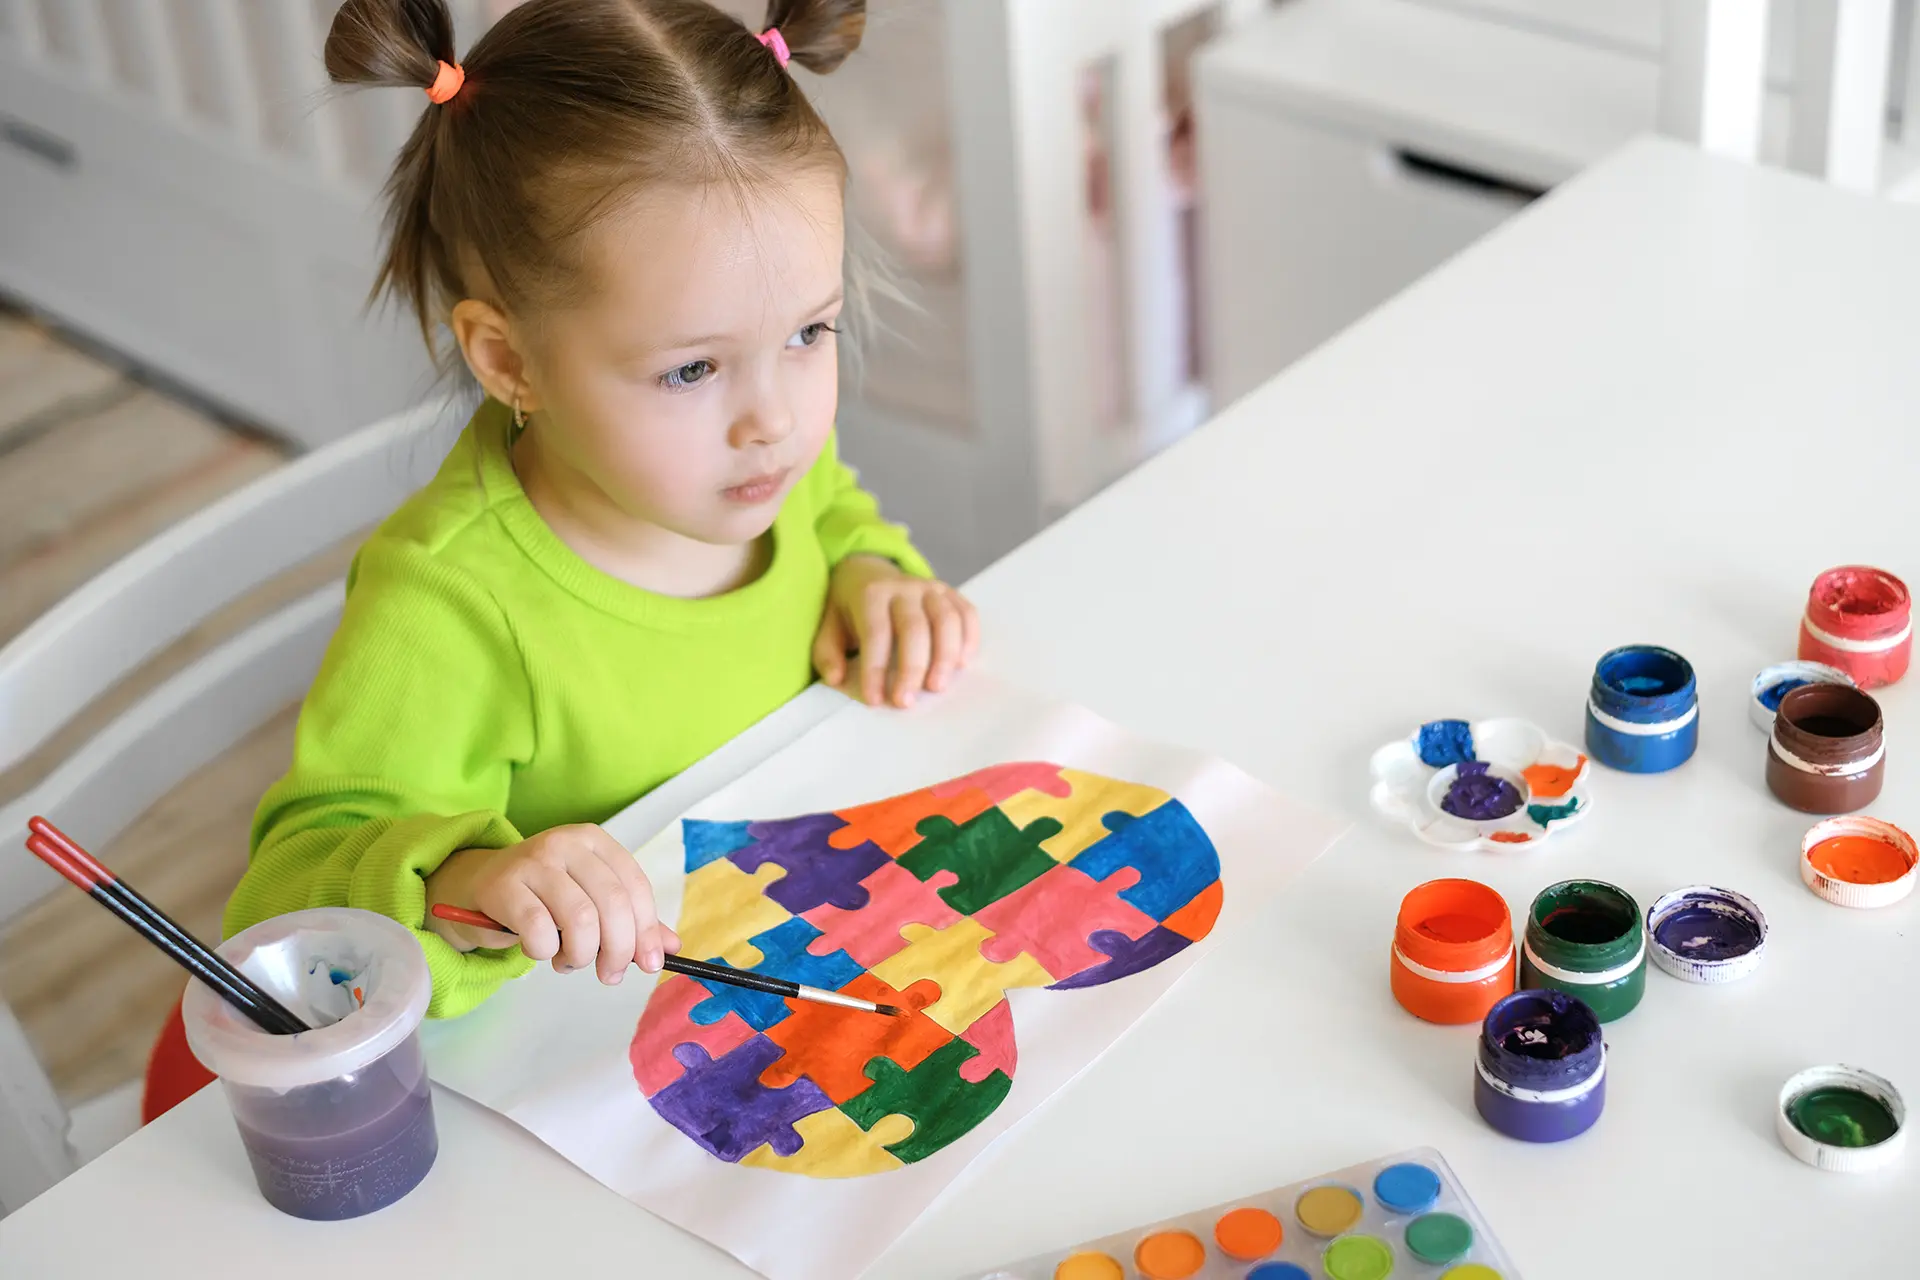 Benefits of montessori education learning disabilities 2